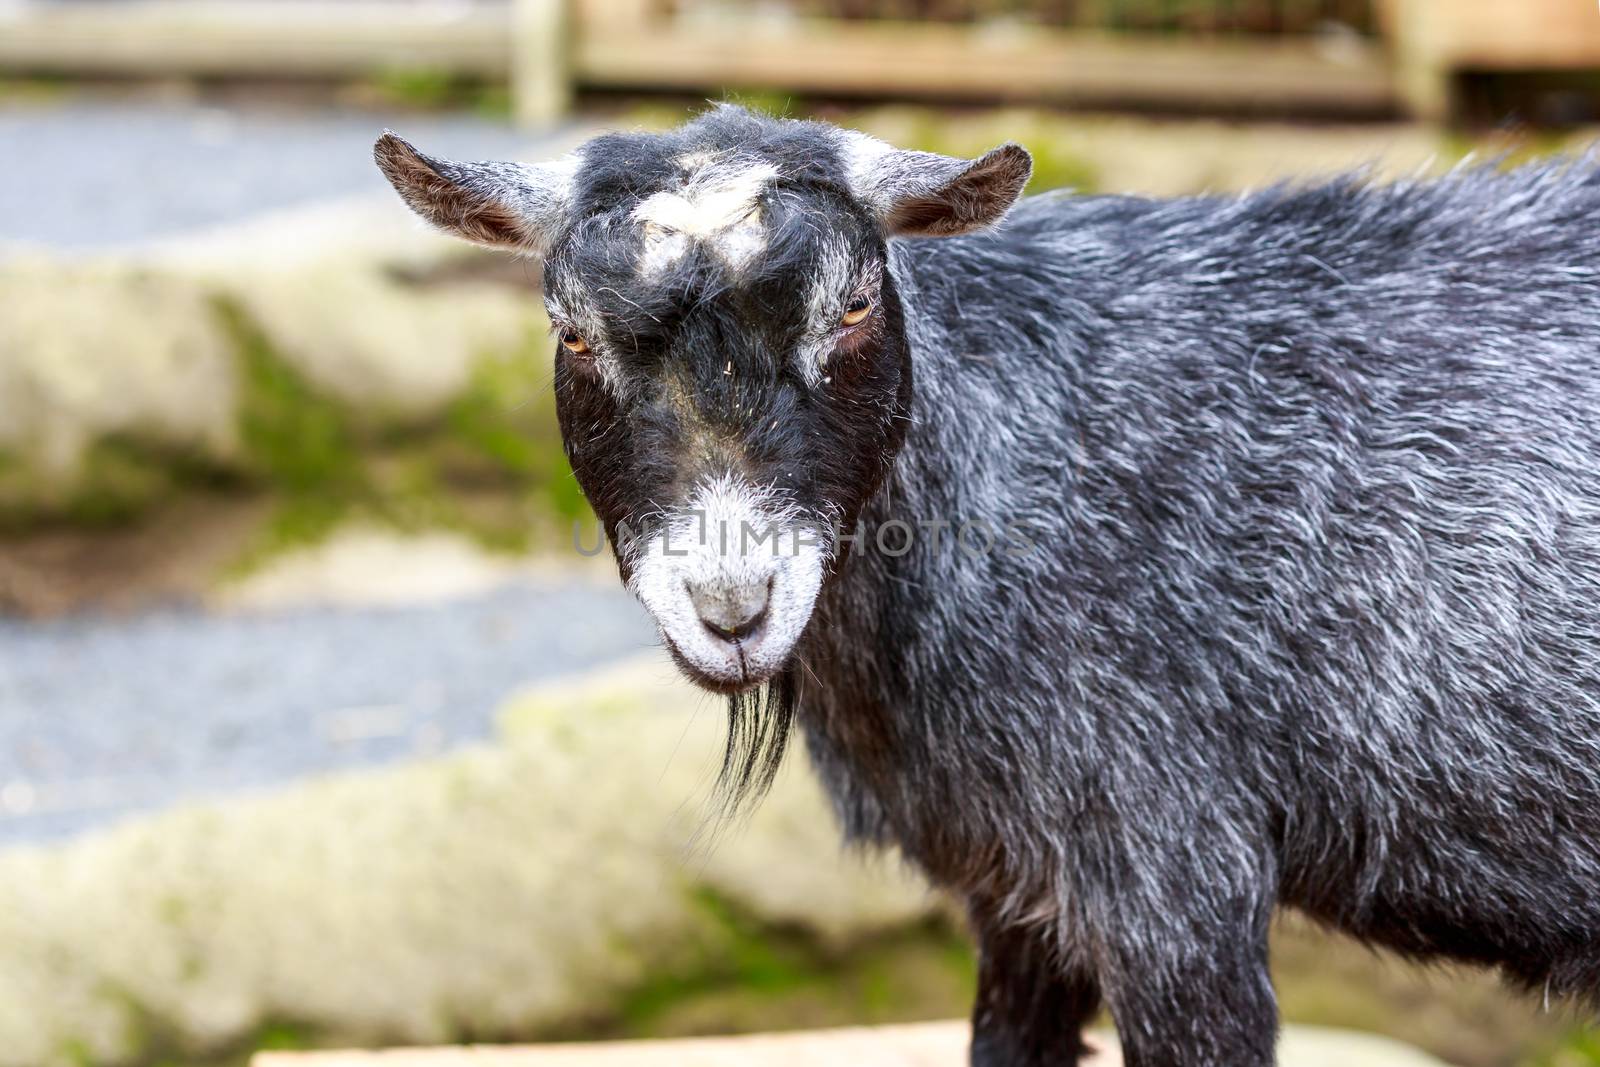 Pygmy goat interactswith visitors in the petting zoos.